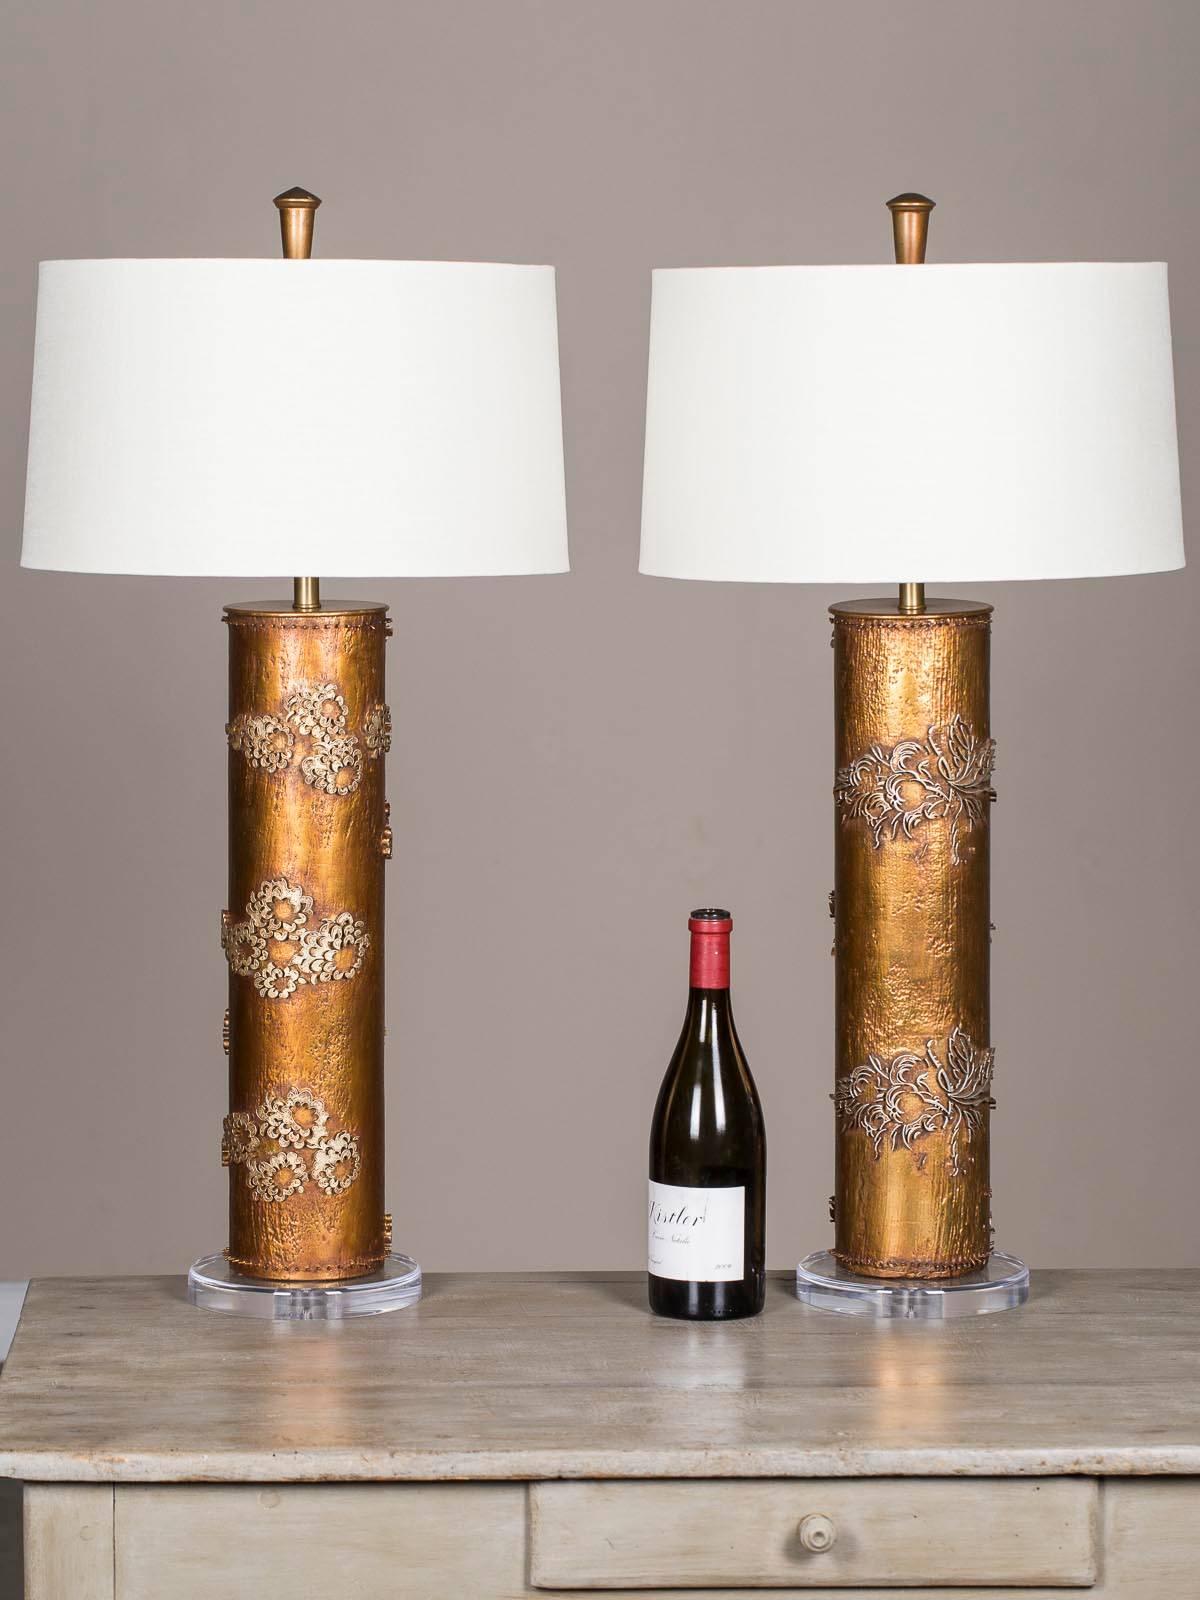 This pair of vintage French wallpaper lamps circa 1960 attributed to the famous American lamp company Marbro. Begun by two brothers after WWII in Los Angeles the company quickly became known for their originality and quality. The brothers were